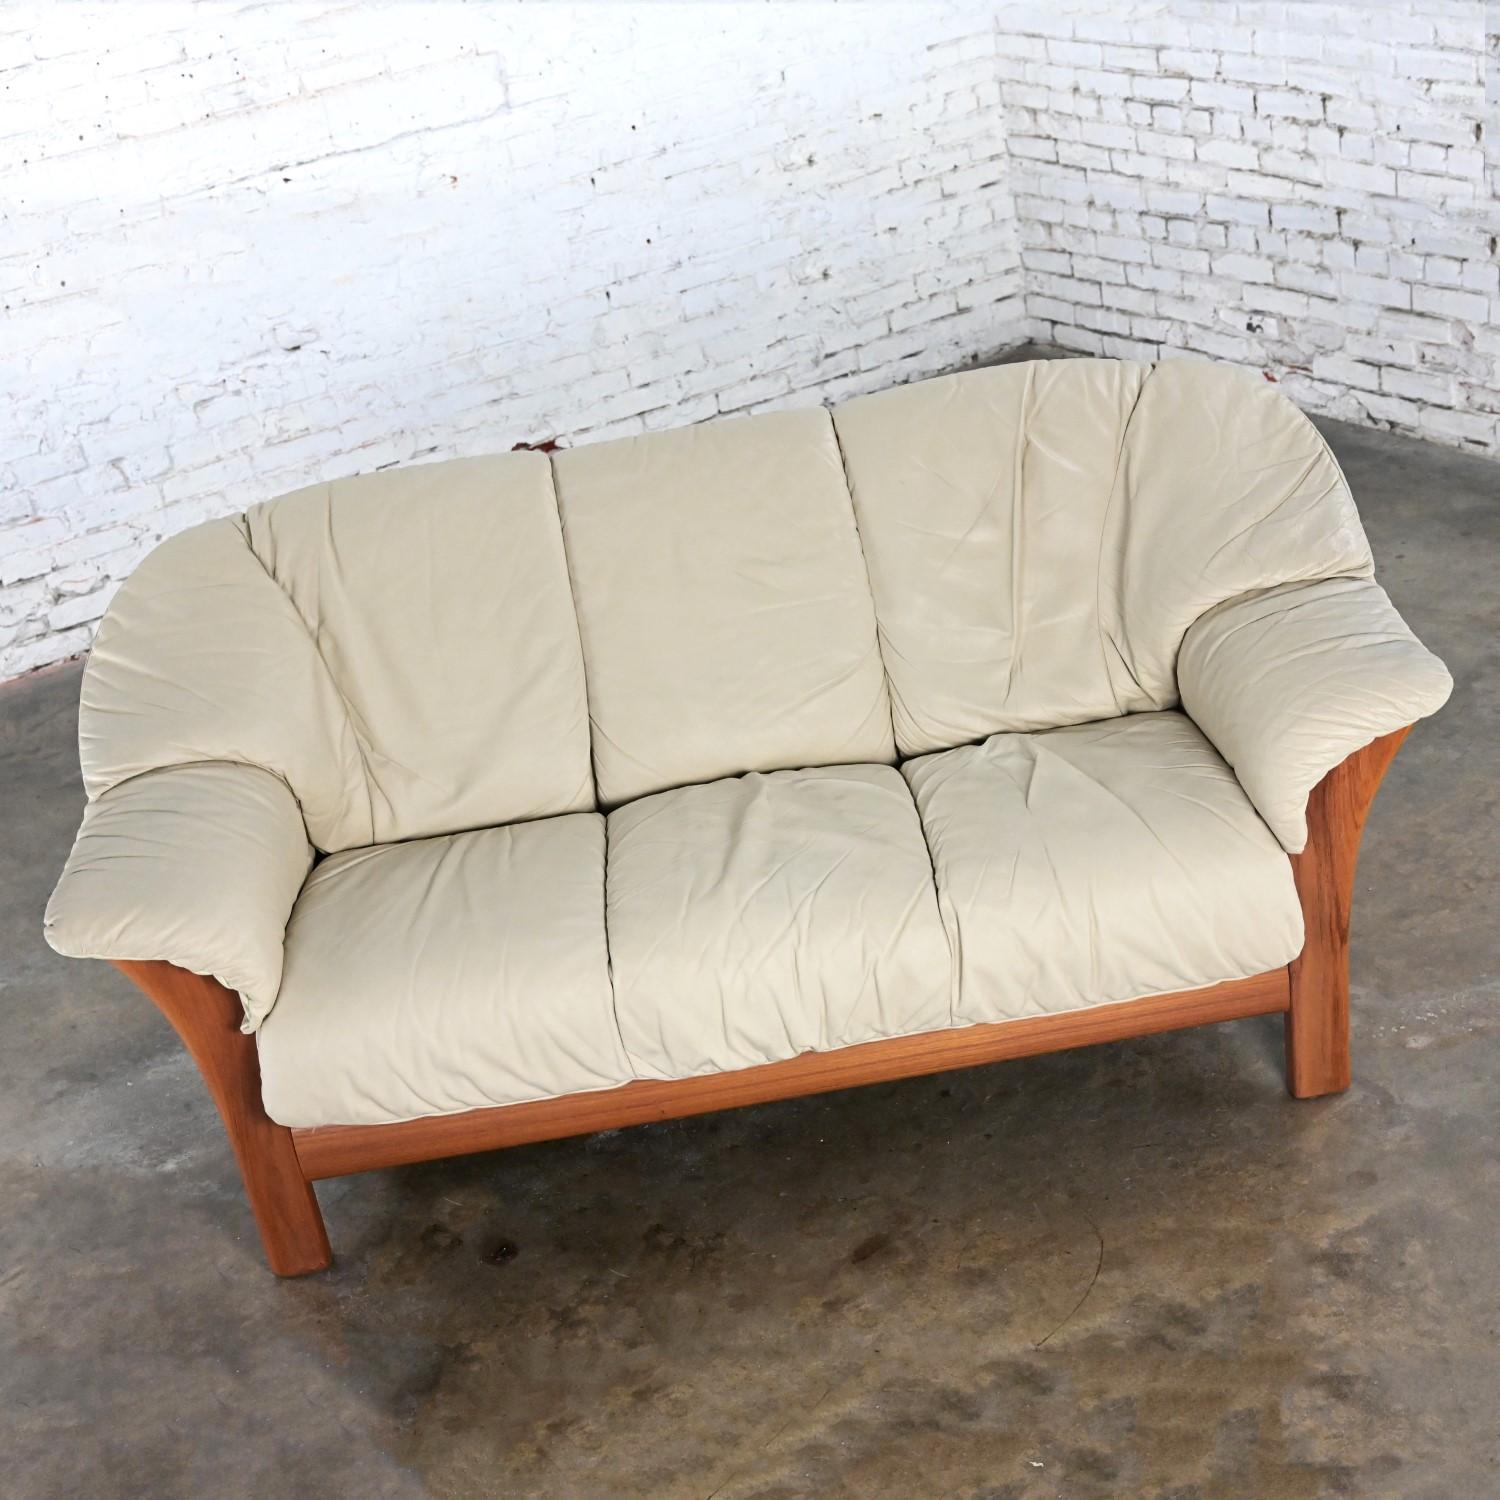 Scandinavian Modern Teak & Off White Leather Small Sofa Attributed to Ekornes For Sale 2